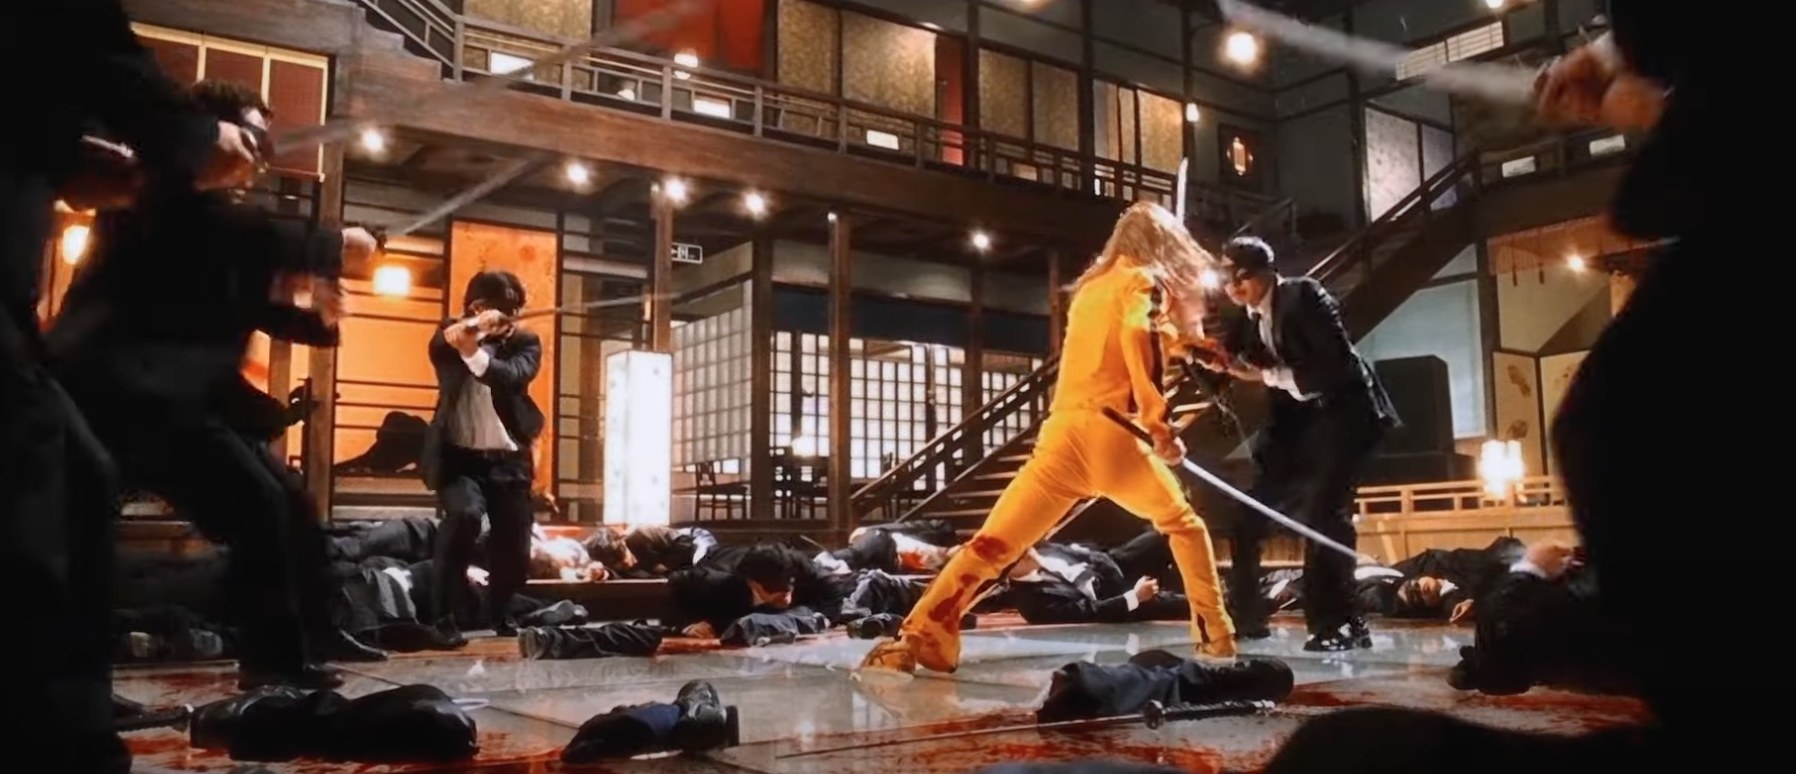 Fighting scene in Kill Bill with lots of bloodshed